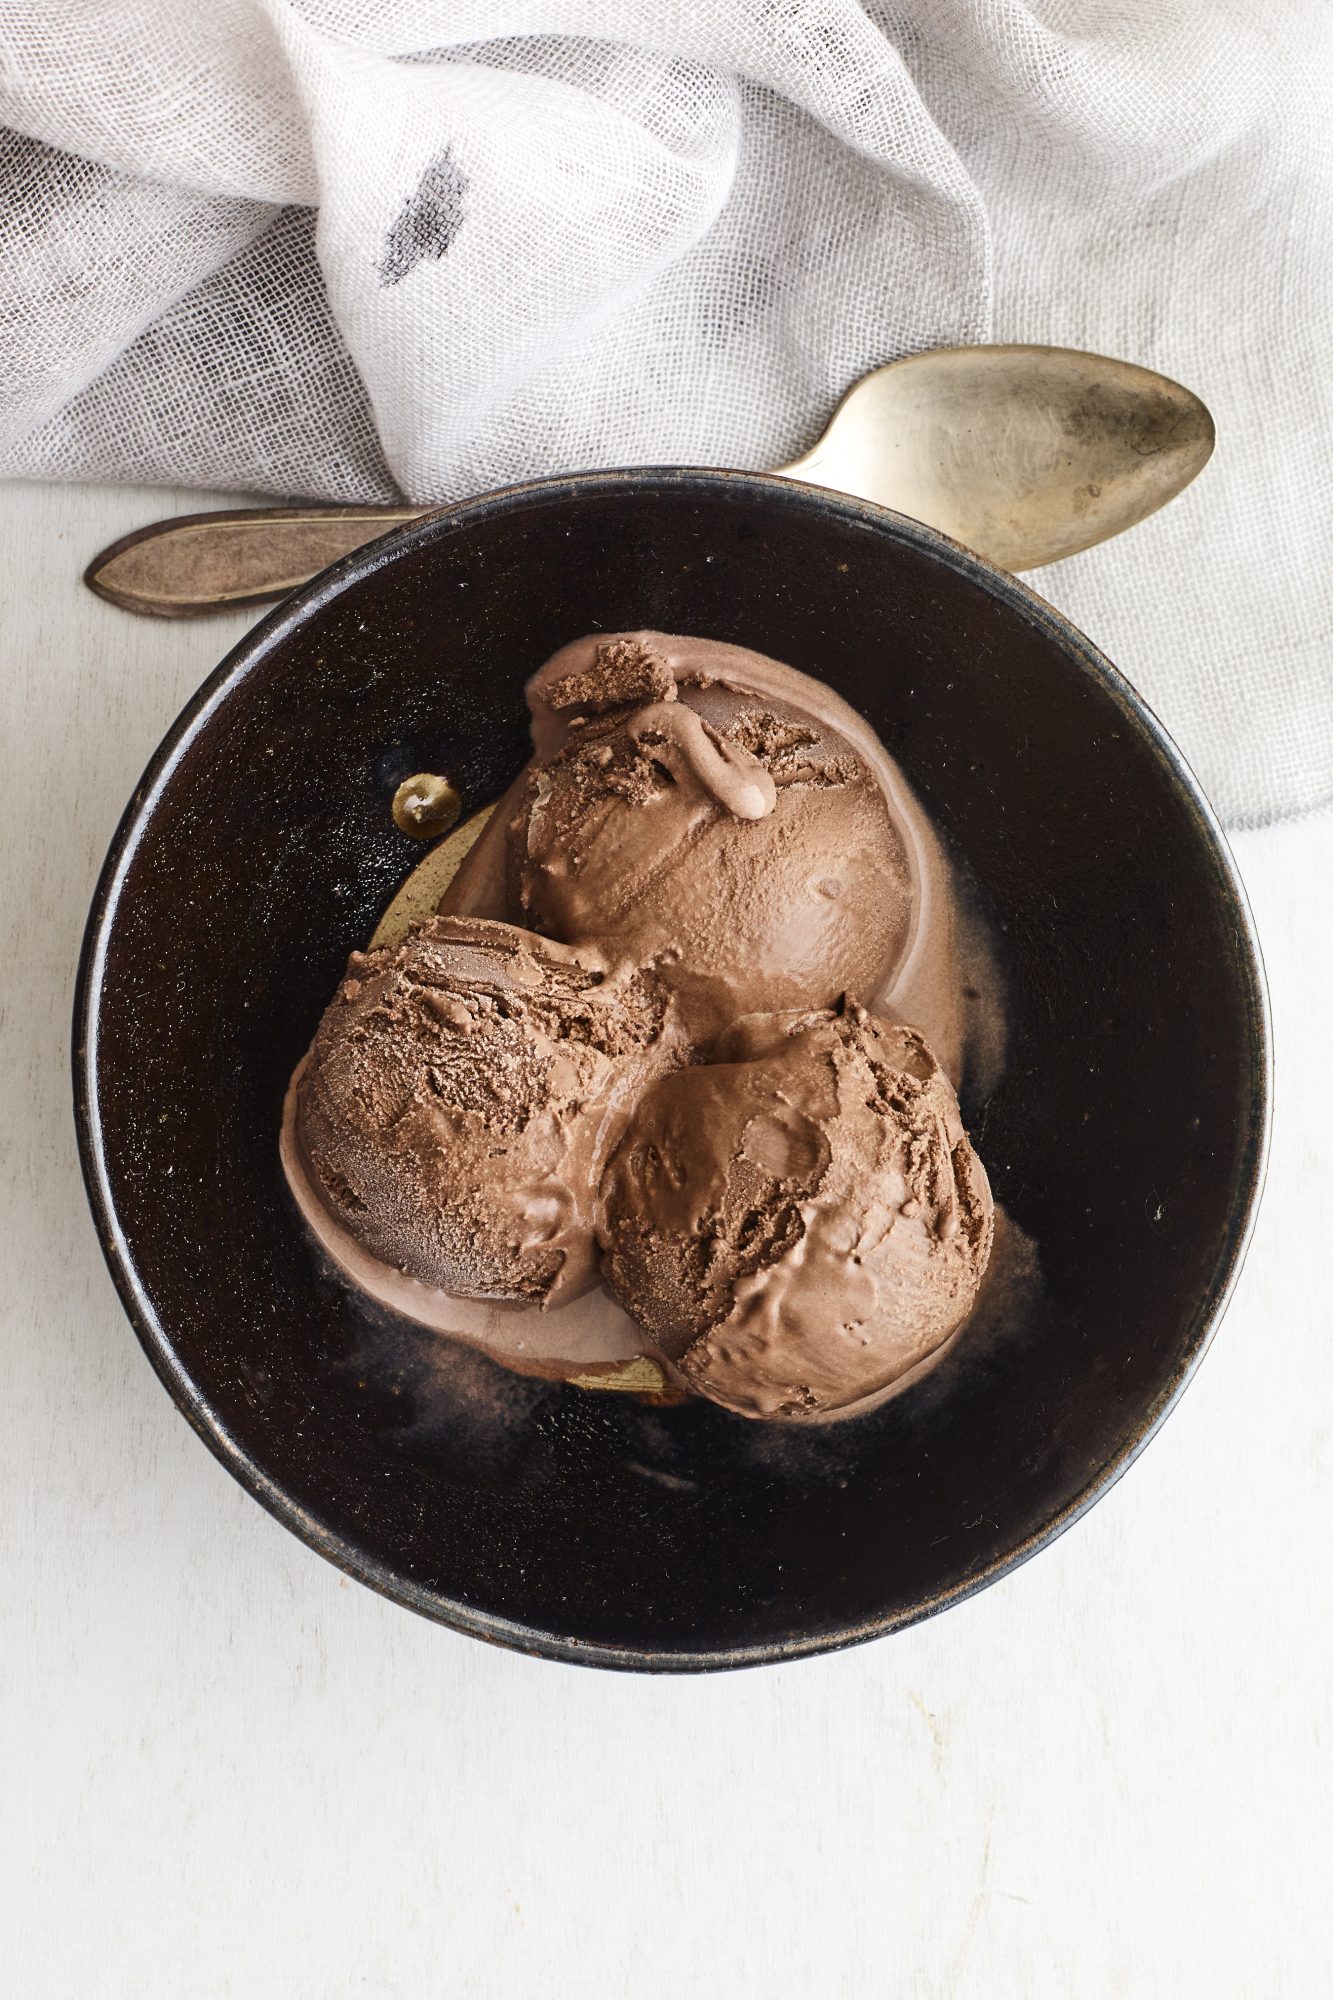 Bittersweet Chocolate and Extra Virgin Olive Oil Ice Cream